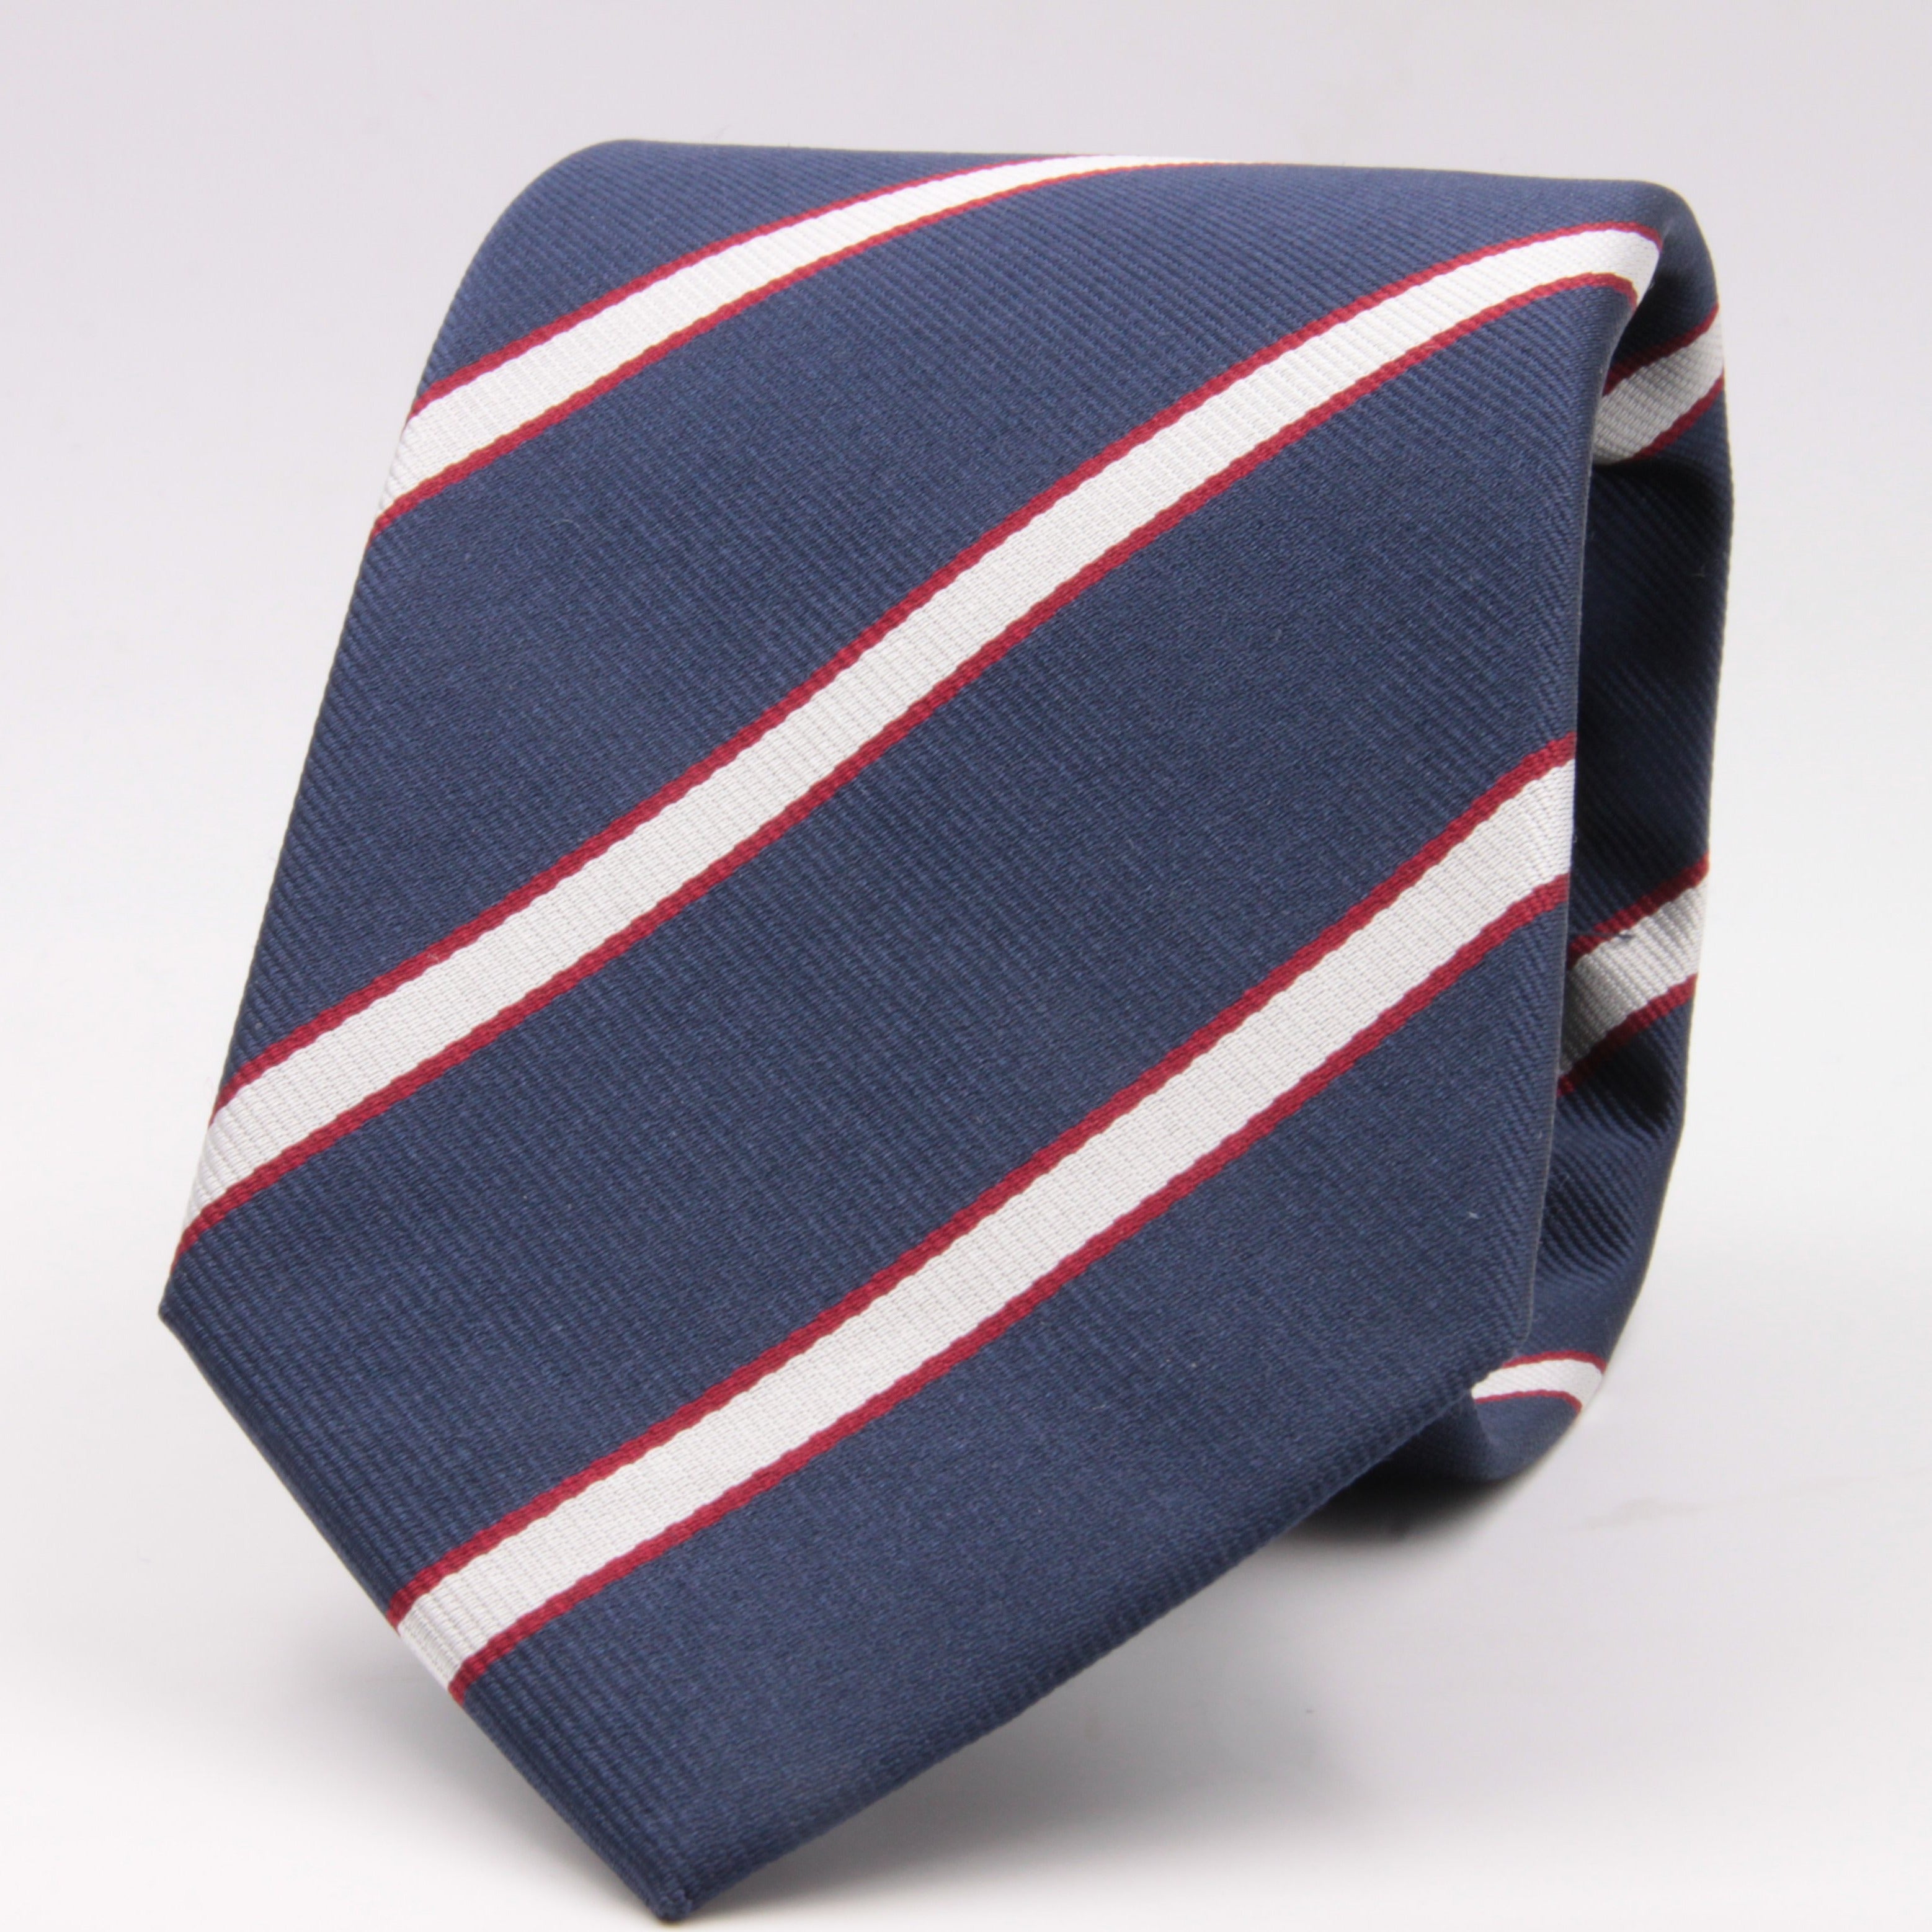 Holliday & Brown for Cruciani & Bella 100% Silk Jacquard  Regimental "Old Rossalians" Blue, White and Red stripes tie Handmade in Italy 8 cm x 150 cm #5120